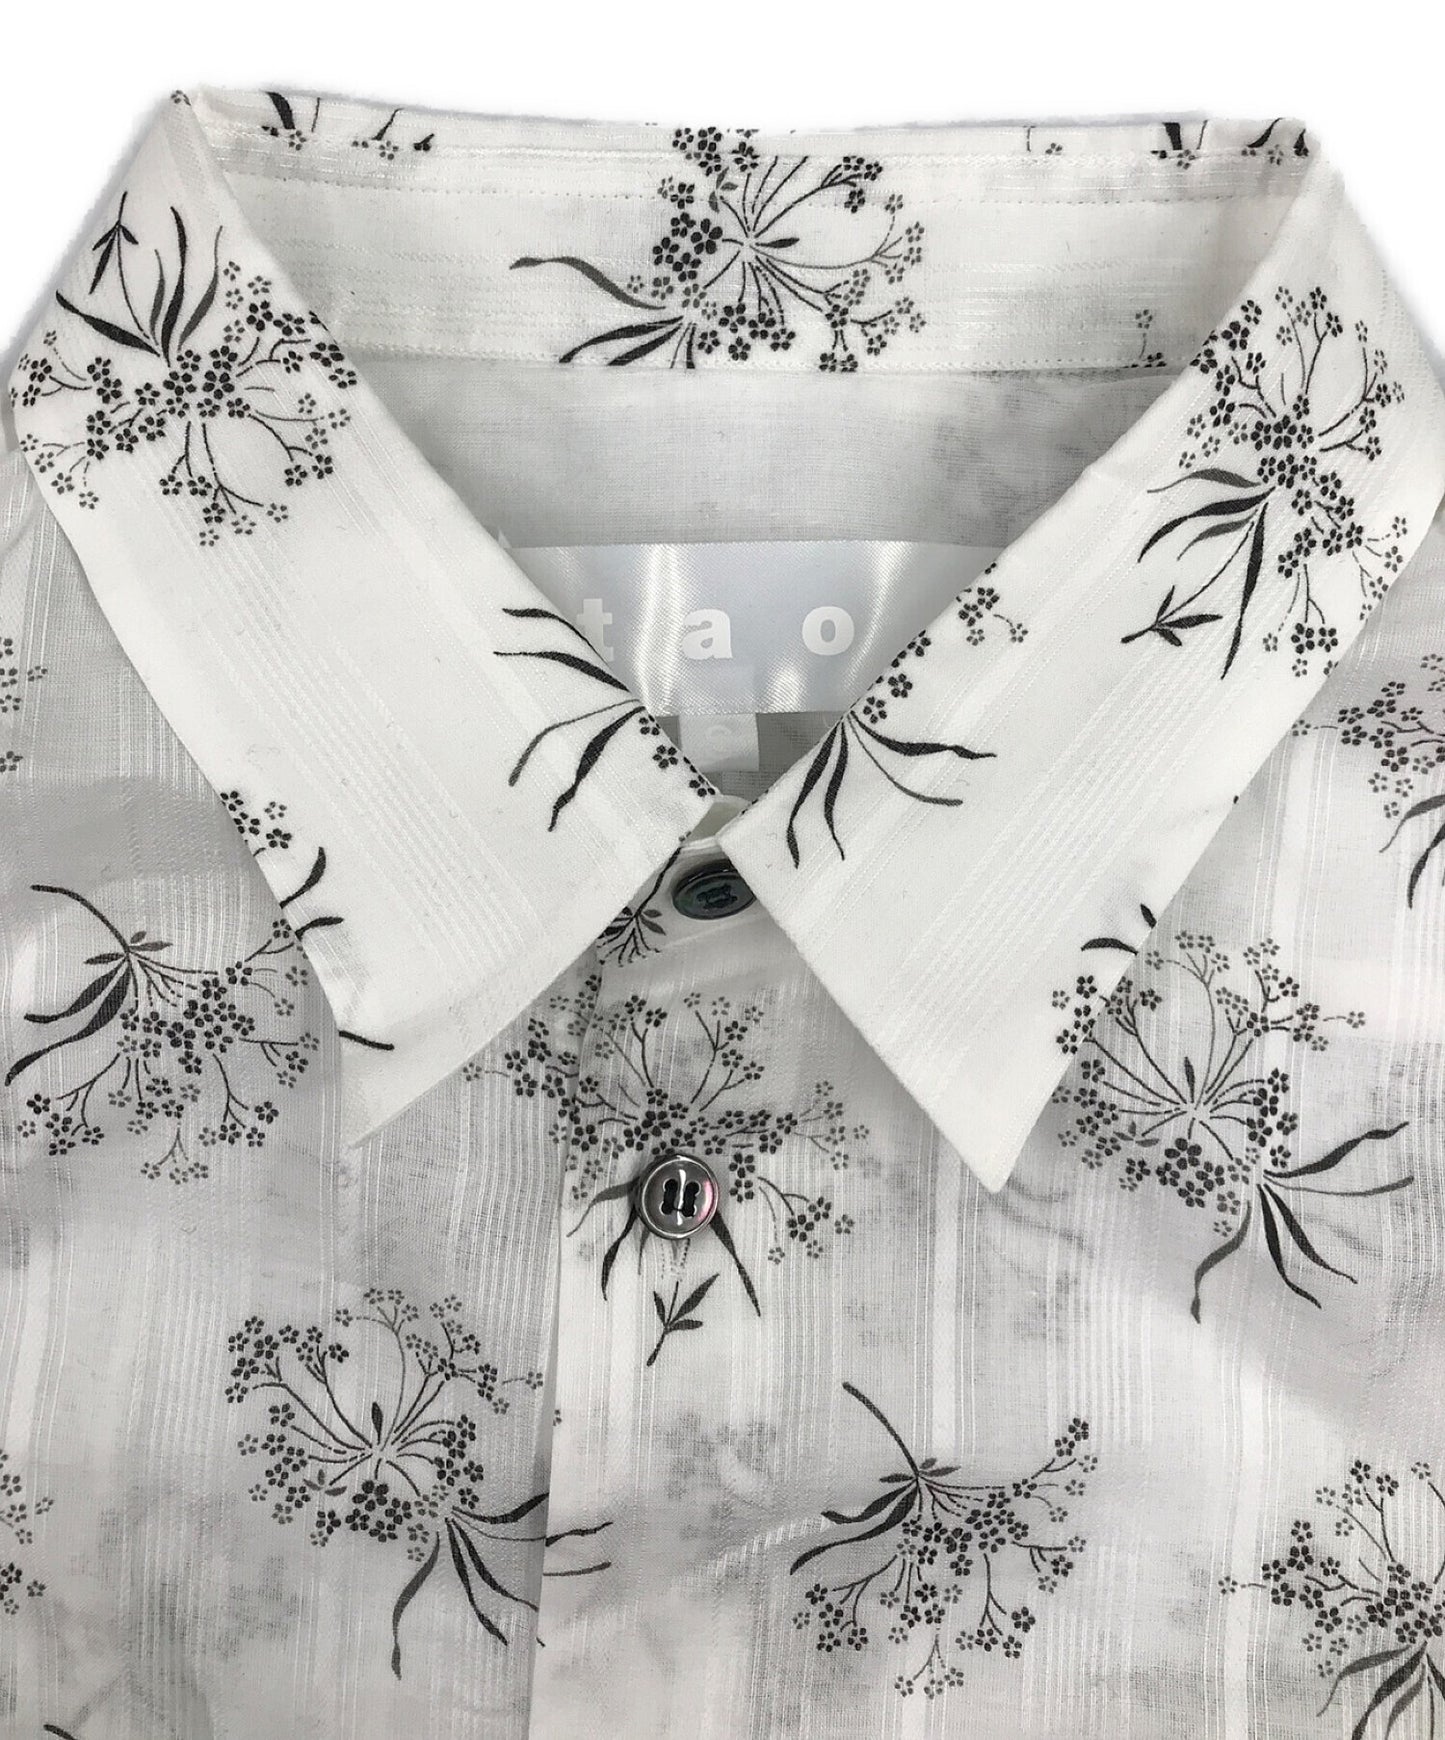 [Pre-owned] TAO COMME des GARCONS flower-patterned shirt TI-B004